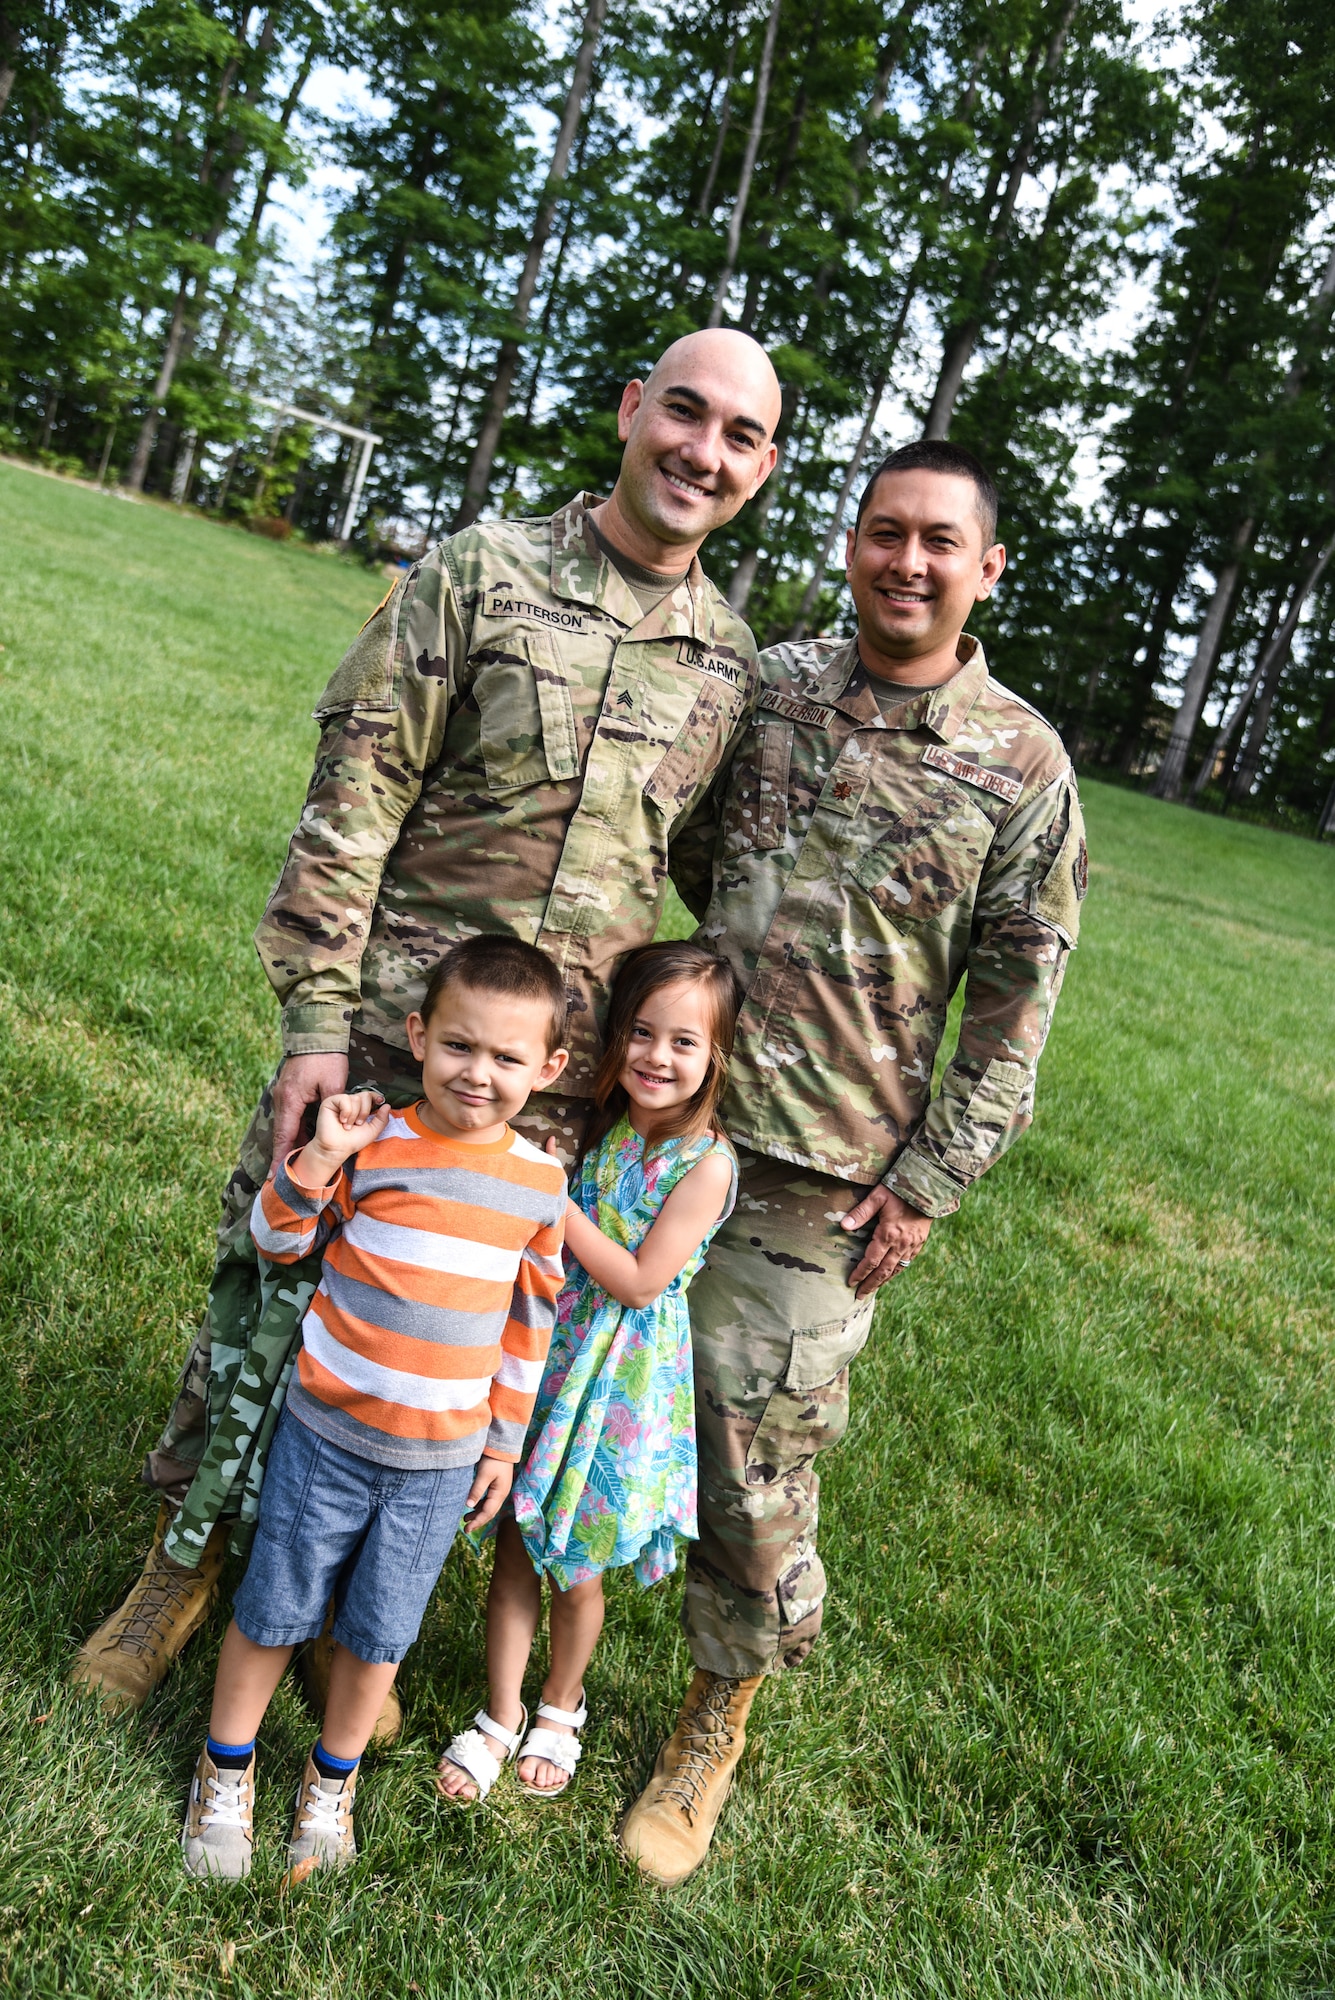 Maj. Patterson serves full-time as the Virginia National Guard’s deputy human resources officer and Sgt. Patterson recently accepted an Active Guardd/Reserve, or AGR, position at the Sandston-based 2nd Battalion, 224th Aviation Regiment. The pair say being a dual military couple has unique challenges.